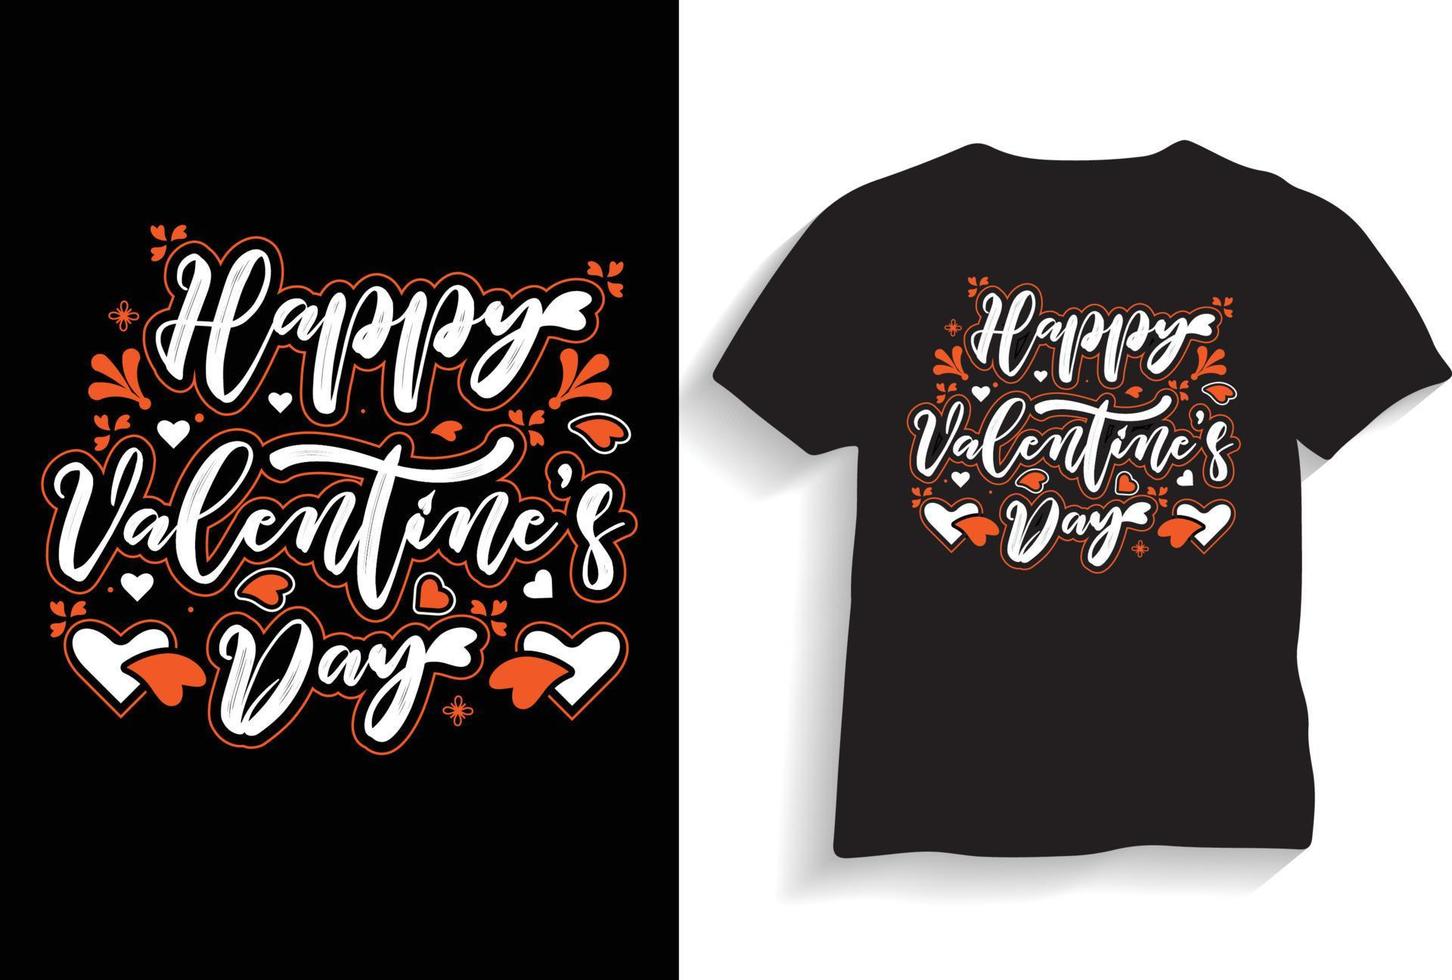 Happy Valentines Day typography valentine quote t shirt or eye-catching design vector